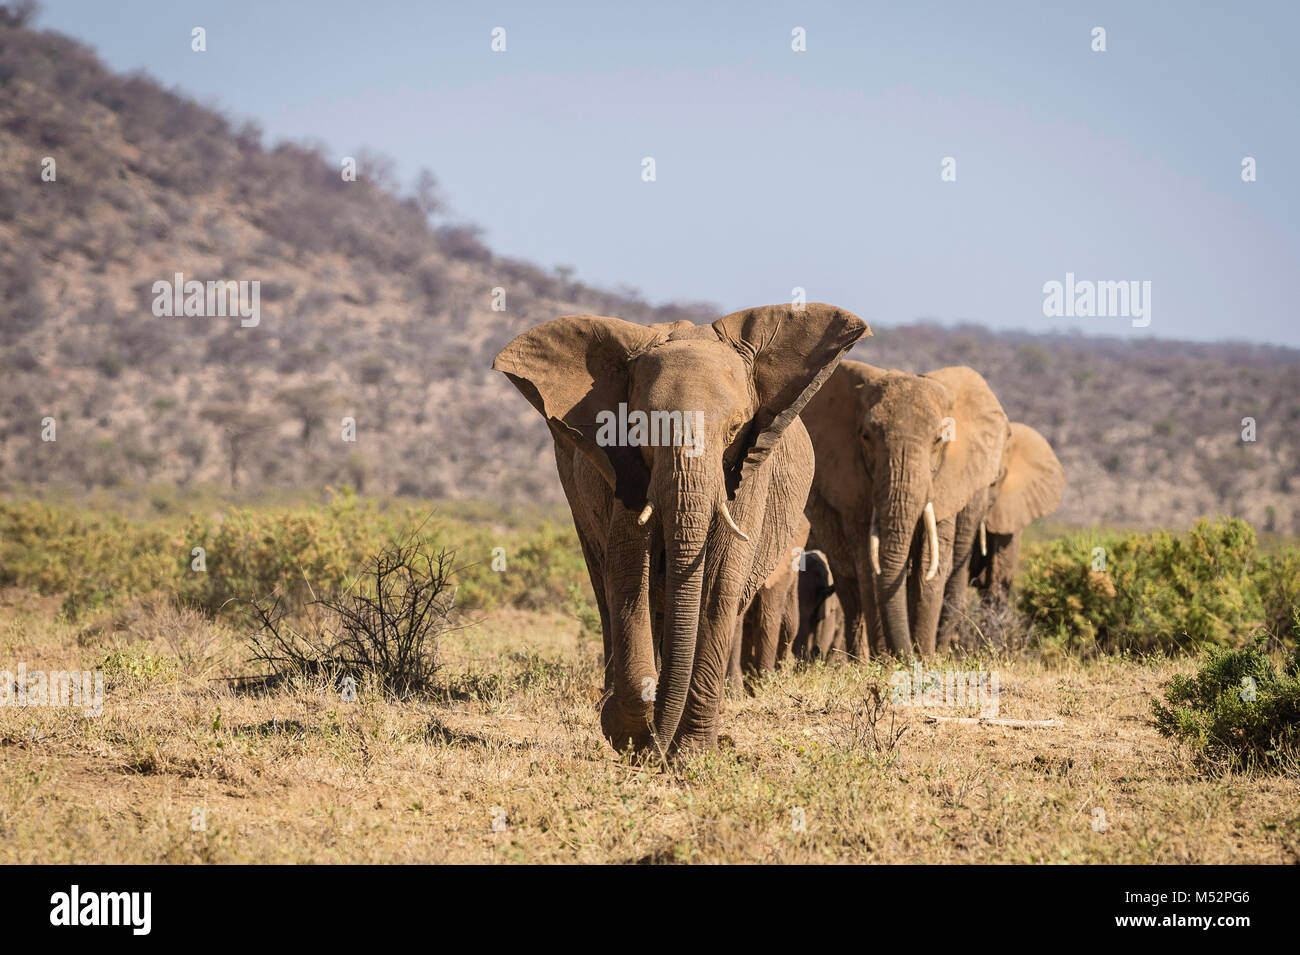 A herd of African elephants walking head to tail through the Samburu National Reserve landscape. Stock Photo